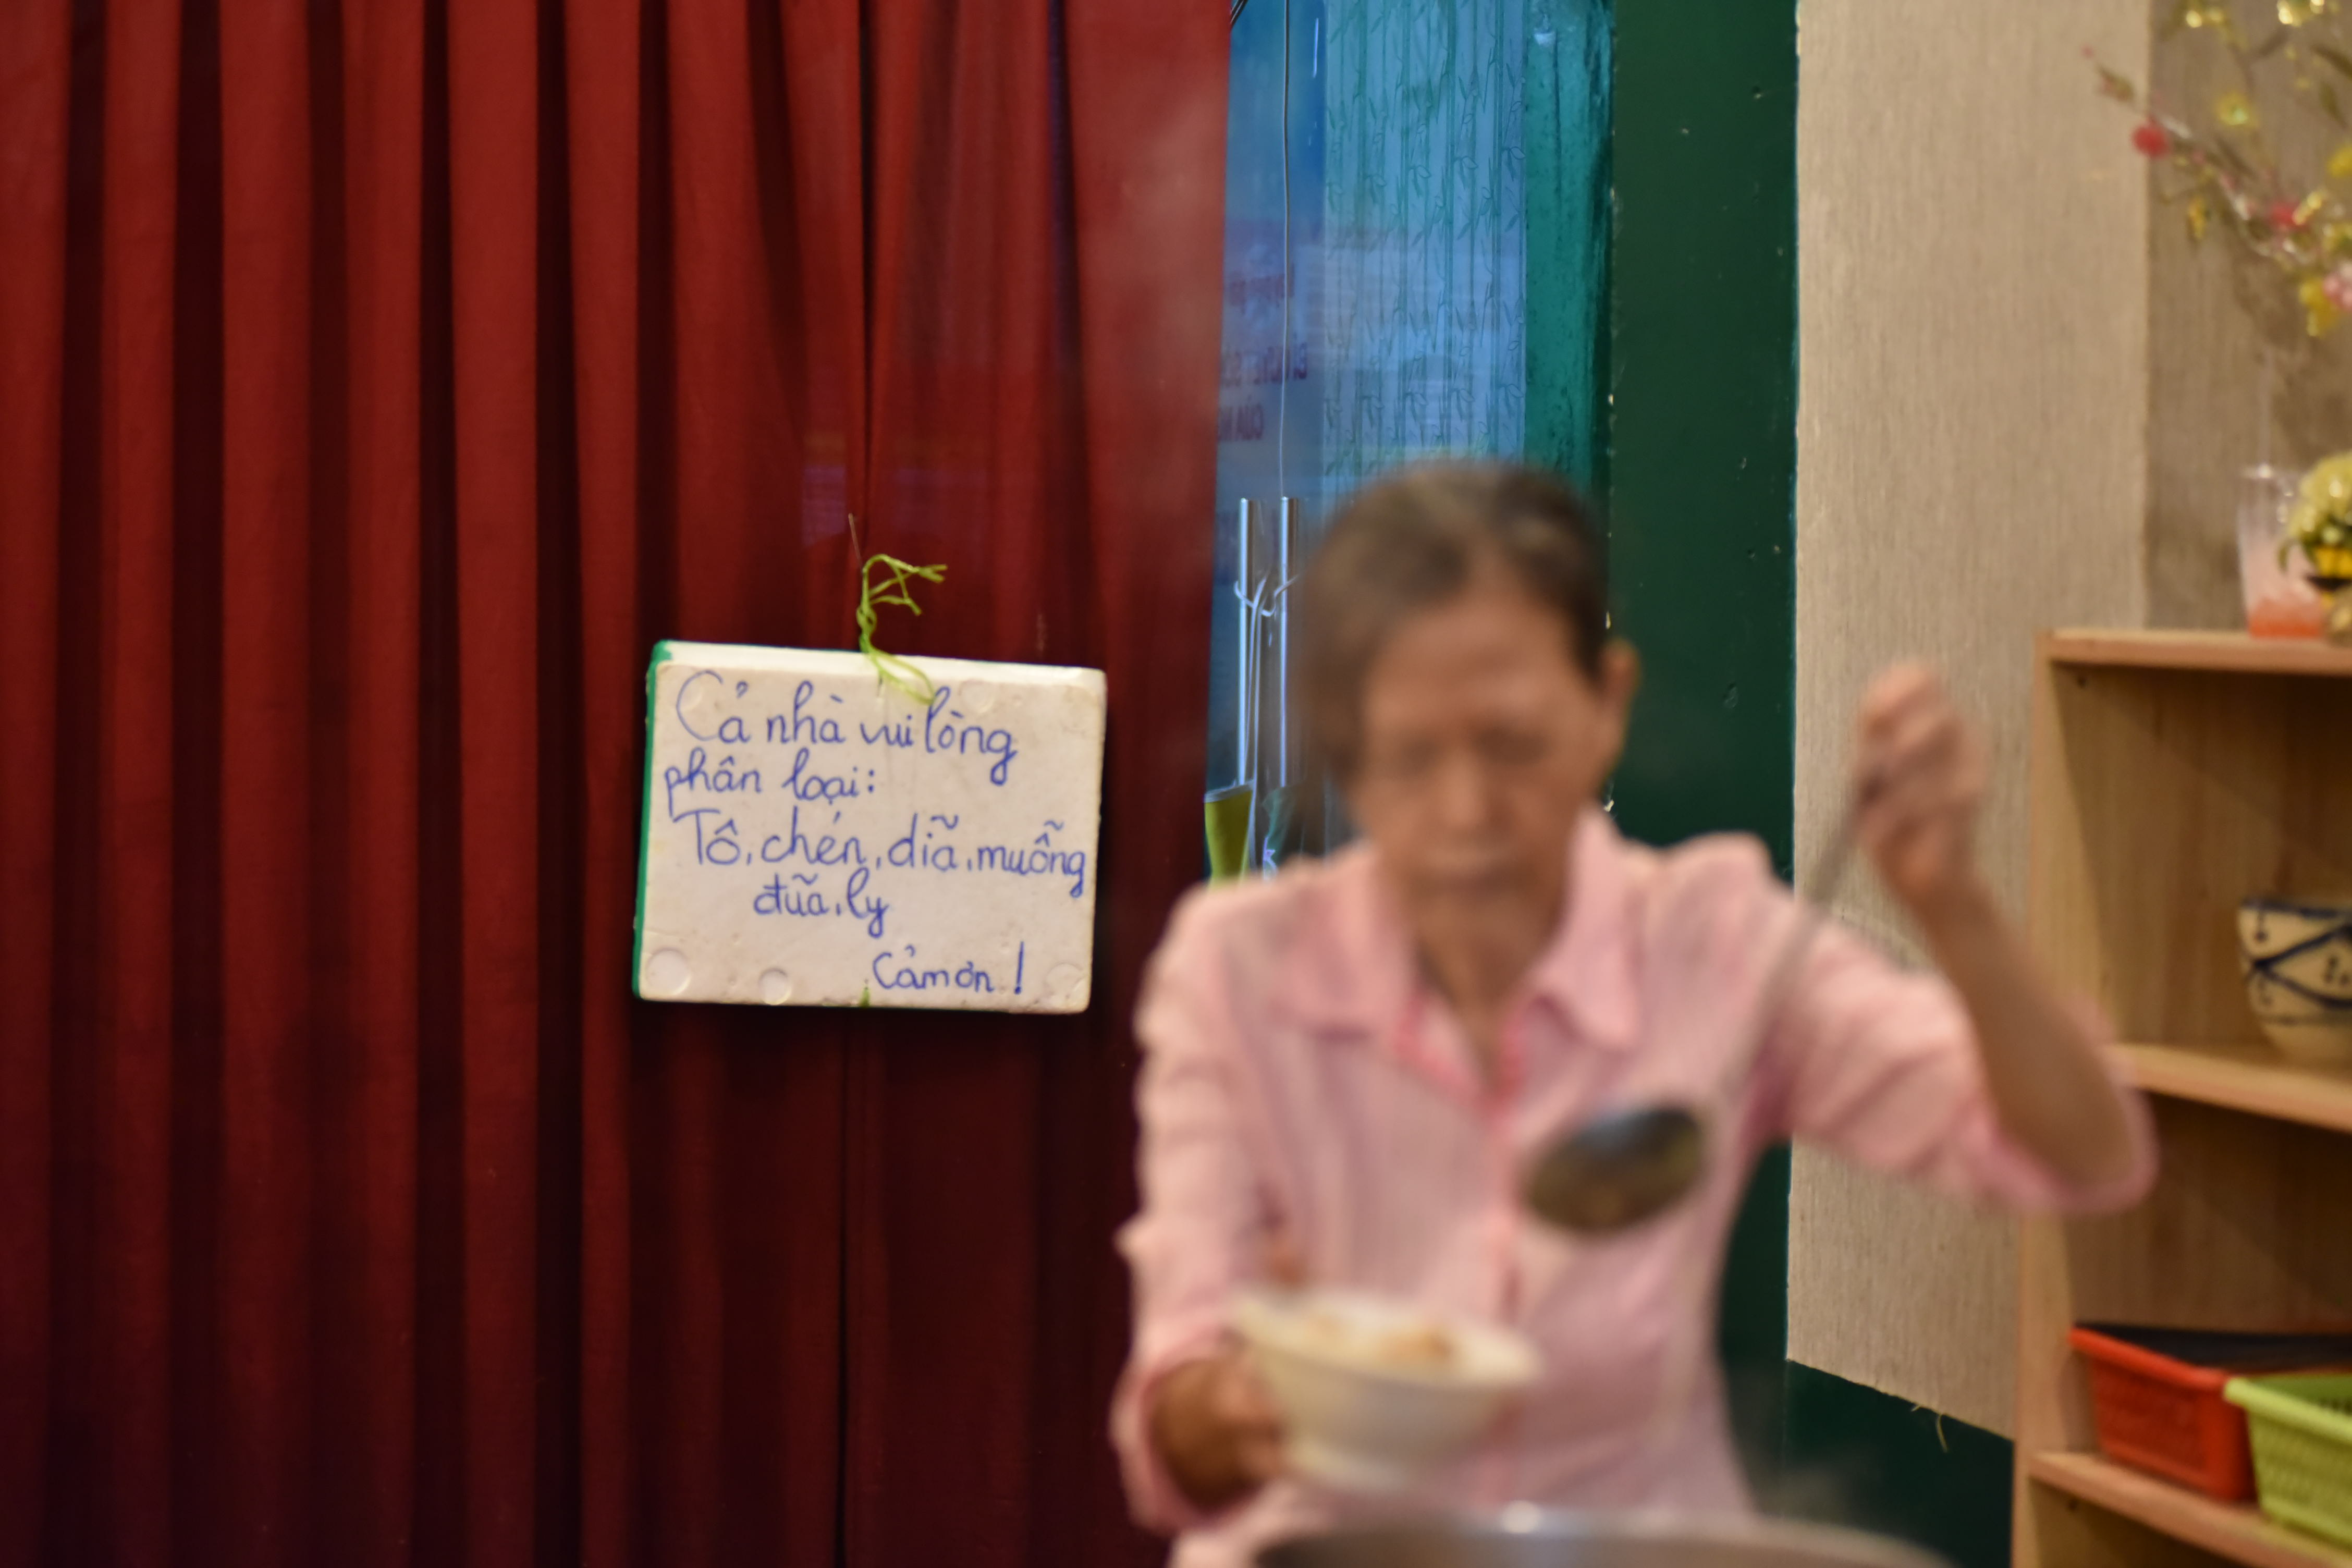 A sign asks diners to clean up and sort their eating utensils after finishing their meals at Man Tu Vegan at 201 Nguyen Thi Minh Khai, District 1, Ho Chi Minh City during peak hours. Photo: Ngoc Phuong / Tuoi Tre News